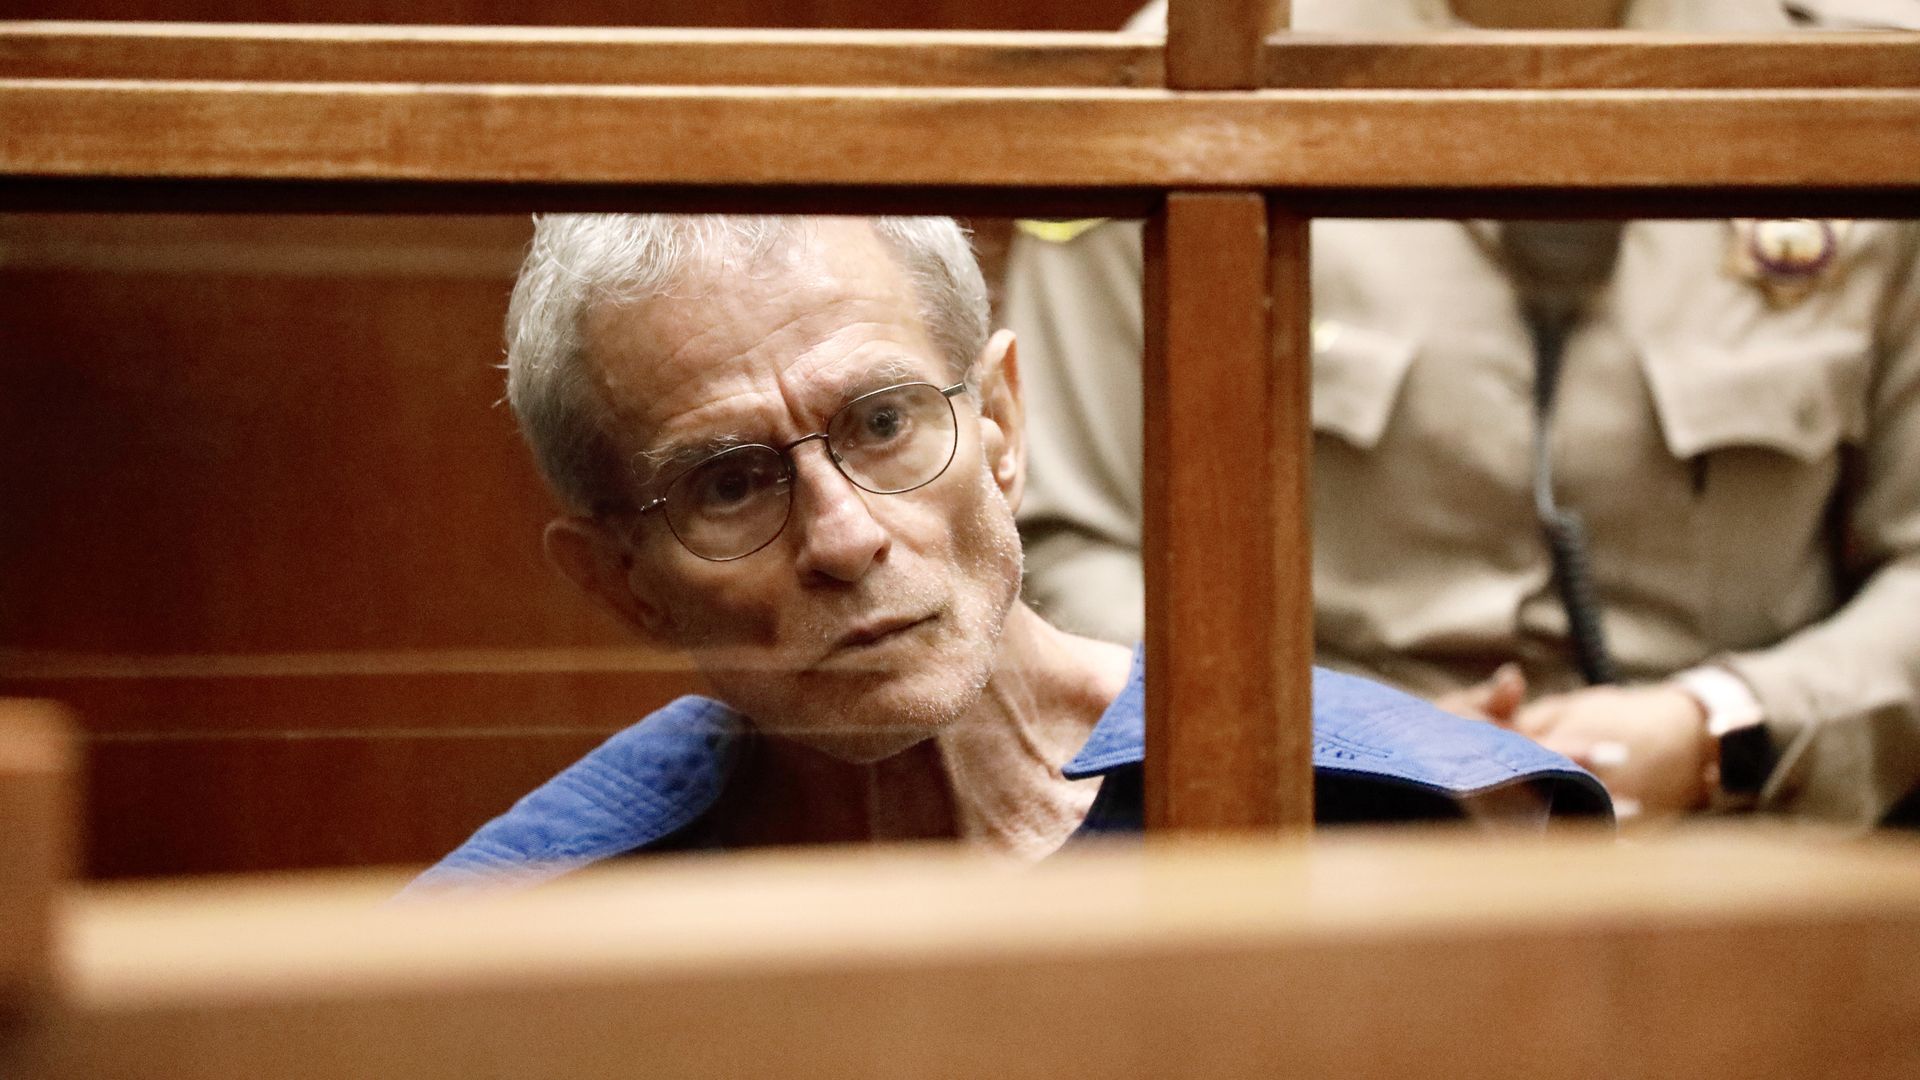 Prominent Democratic Party donor Ed Buck appears in court Thursday, September 19